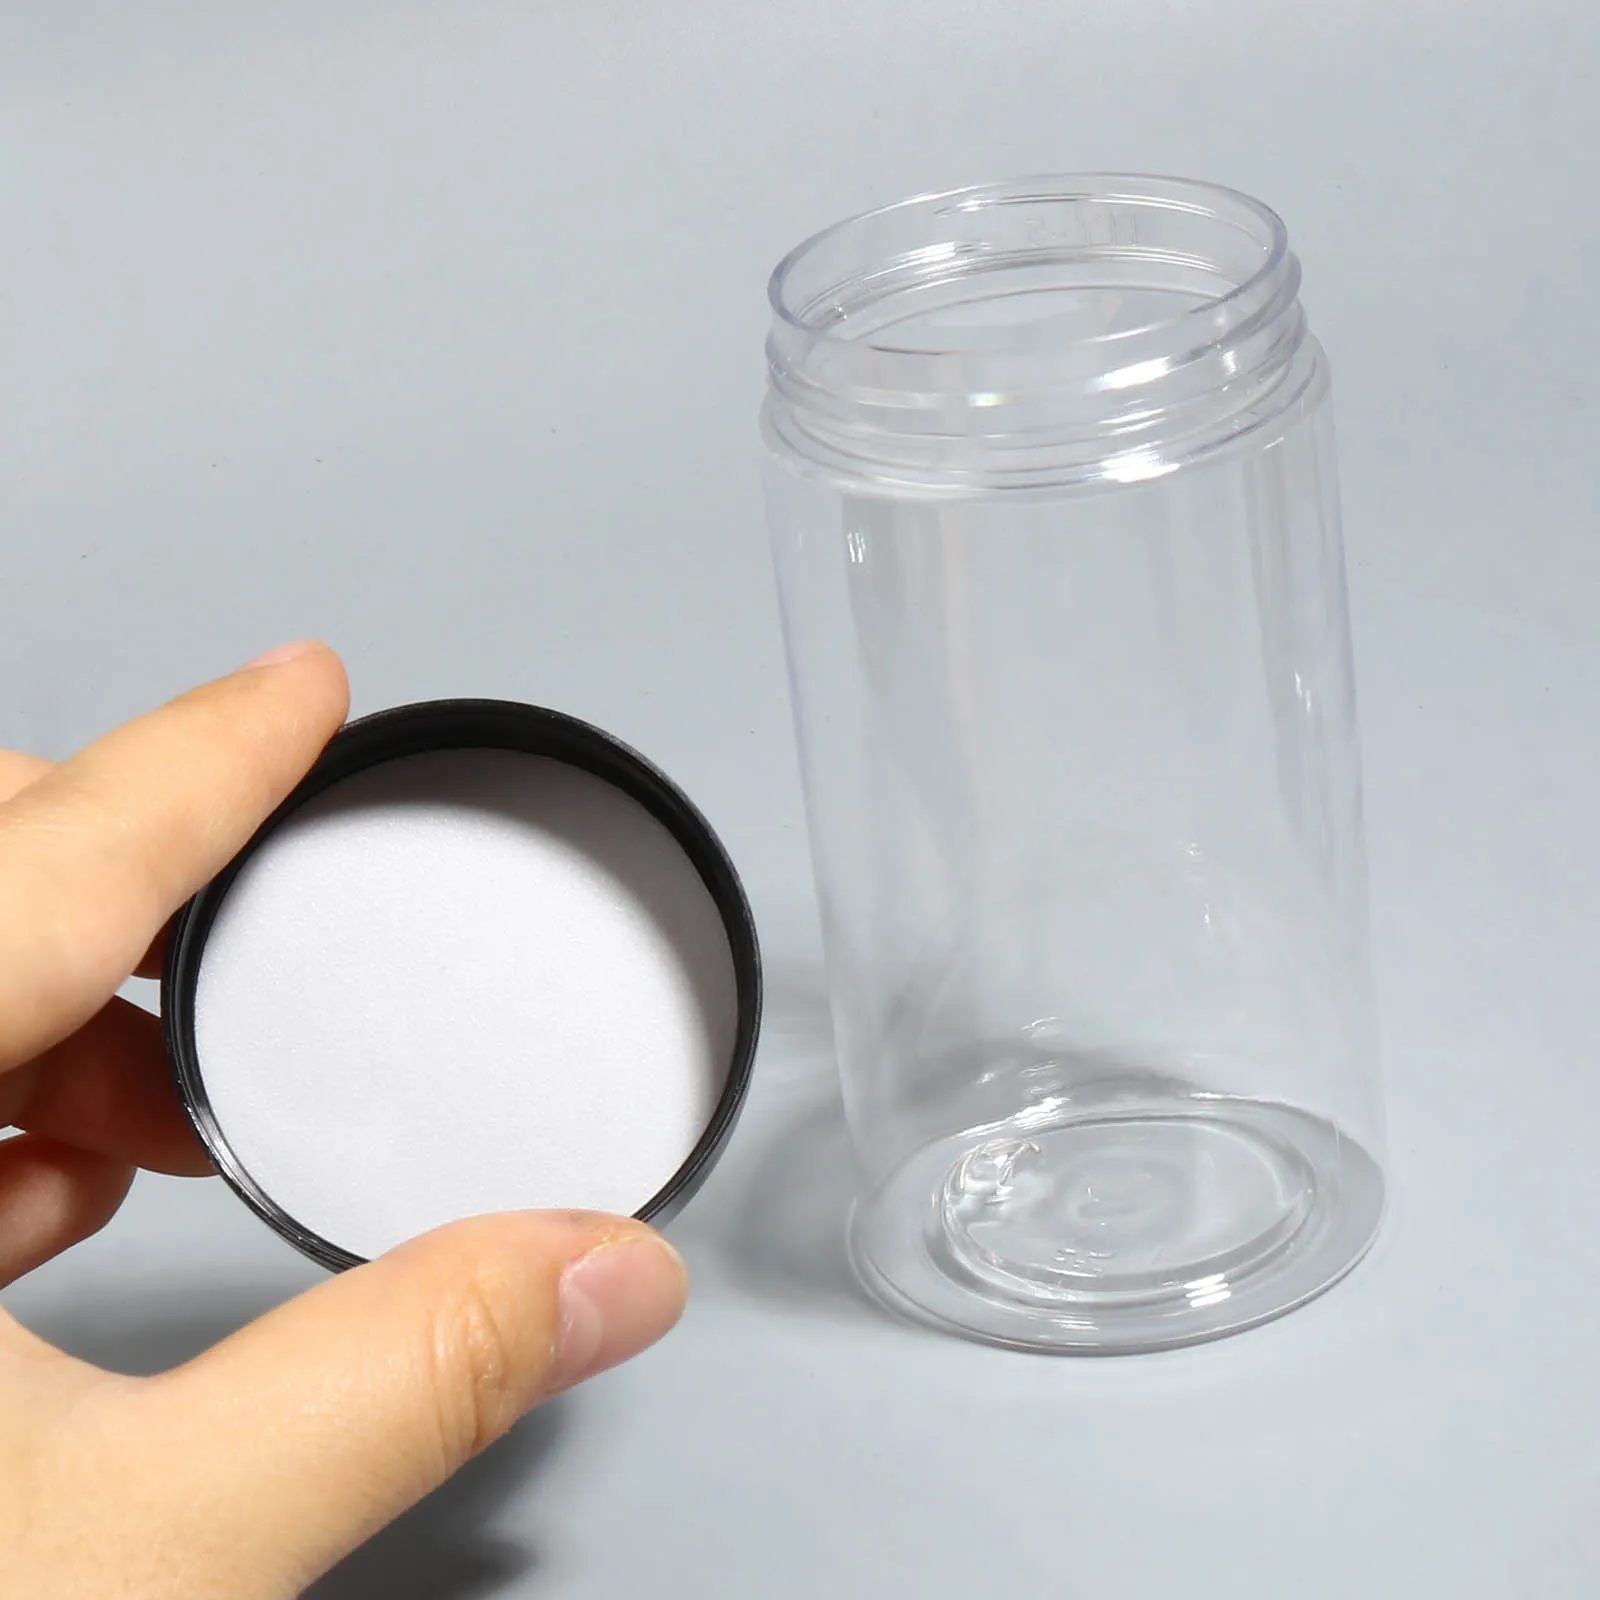 https://ae01.alicdn.com/kf/H85930067564541cc84a15b095bd8c7b1F/2pcs-Empty-Jewelry-Cosmetic-Jars-100-120-150ml-Black-Lid-Plastic-Refillable-Makeup-Balm-Container-Travel.jpg